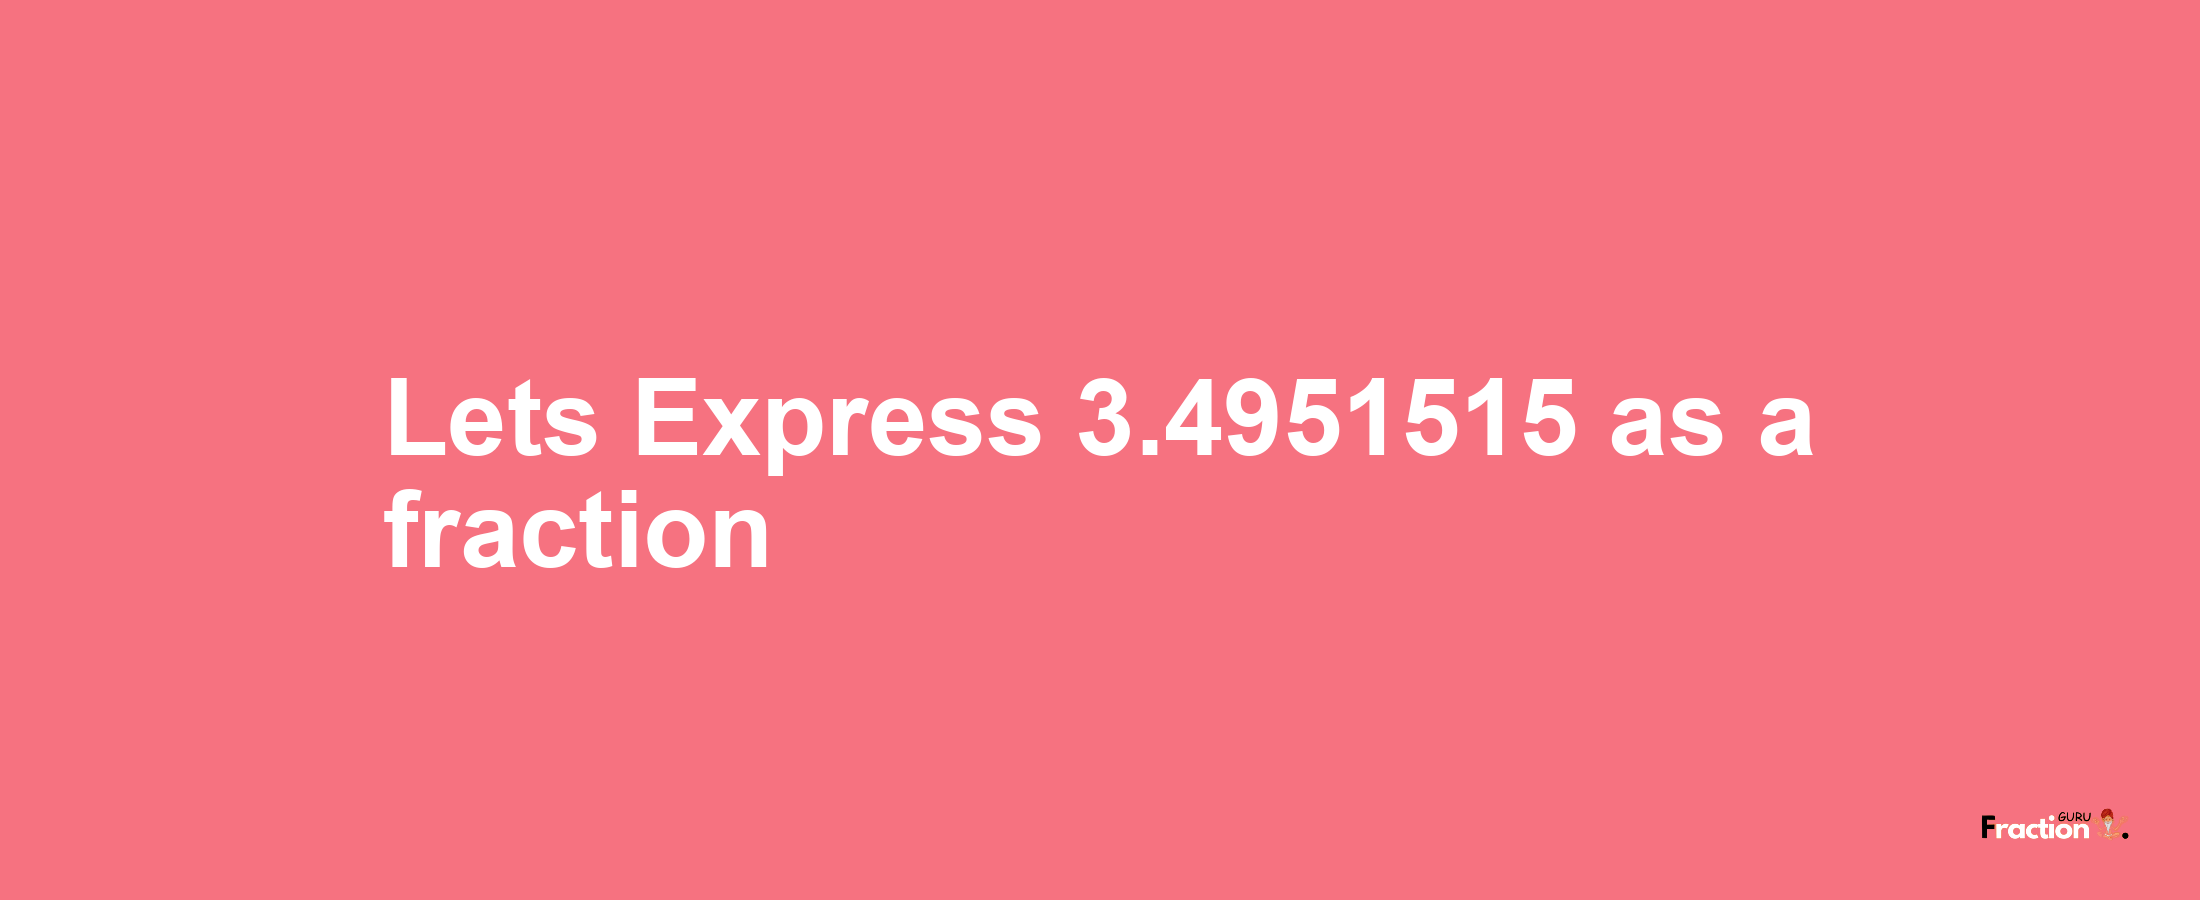 Lets Express 3.4951515 as afraction